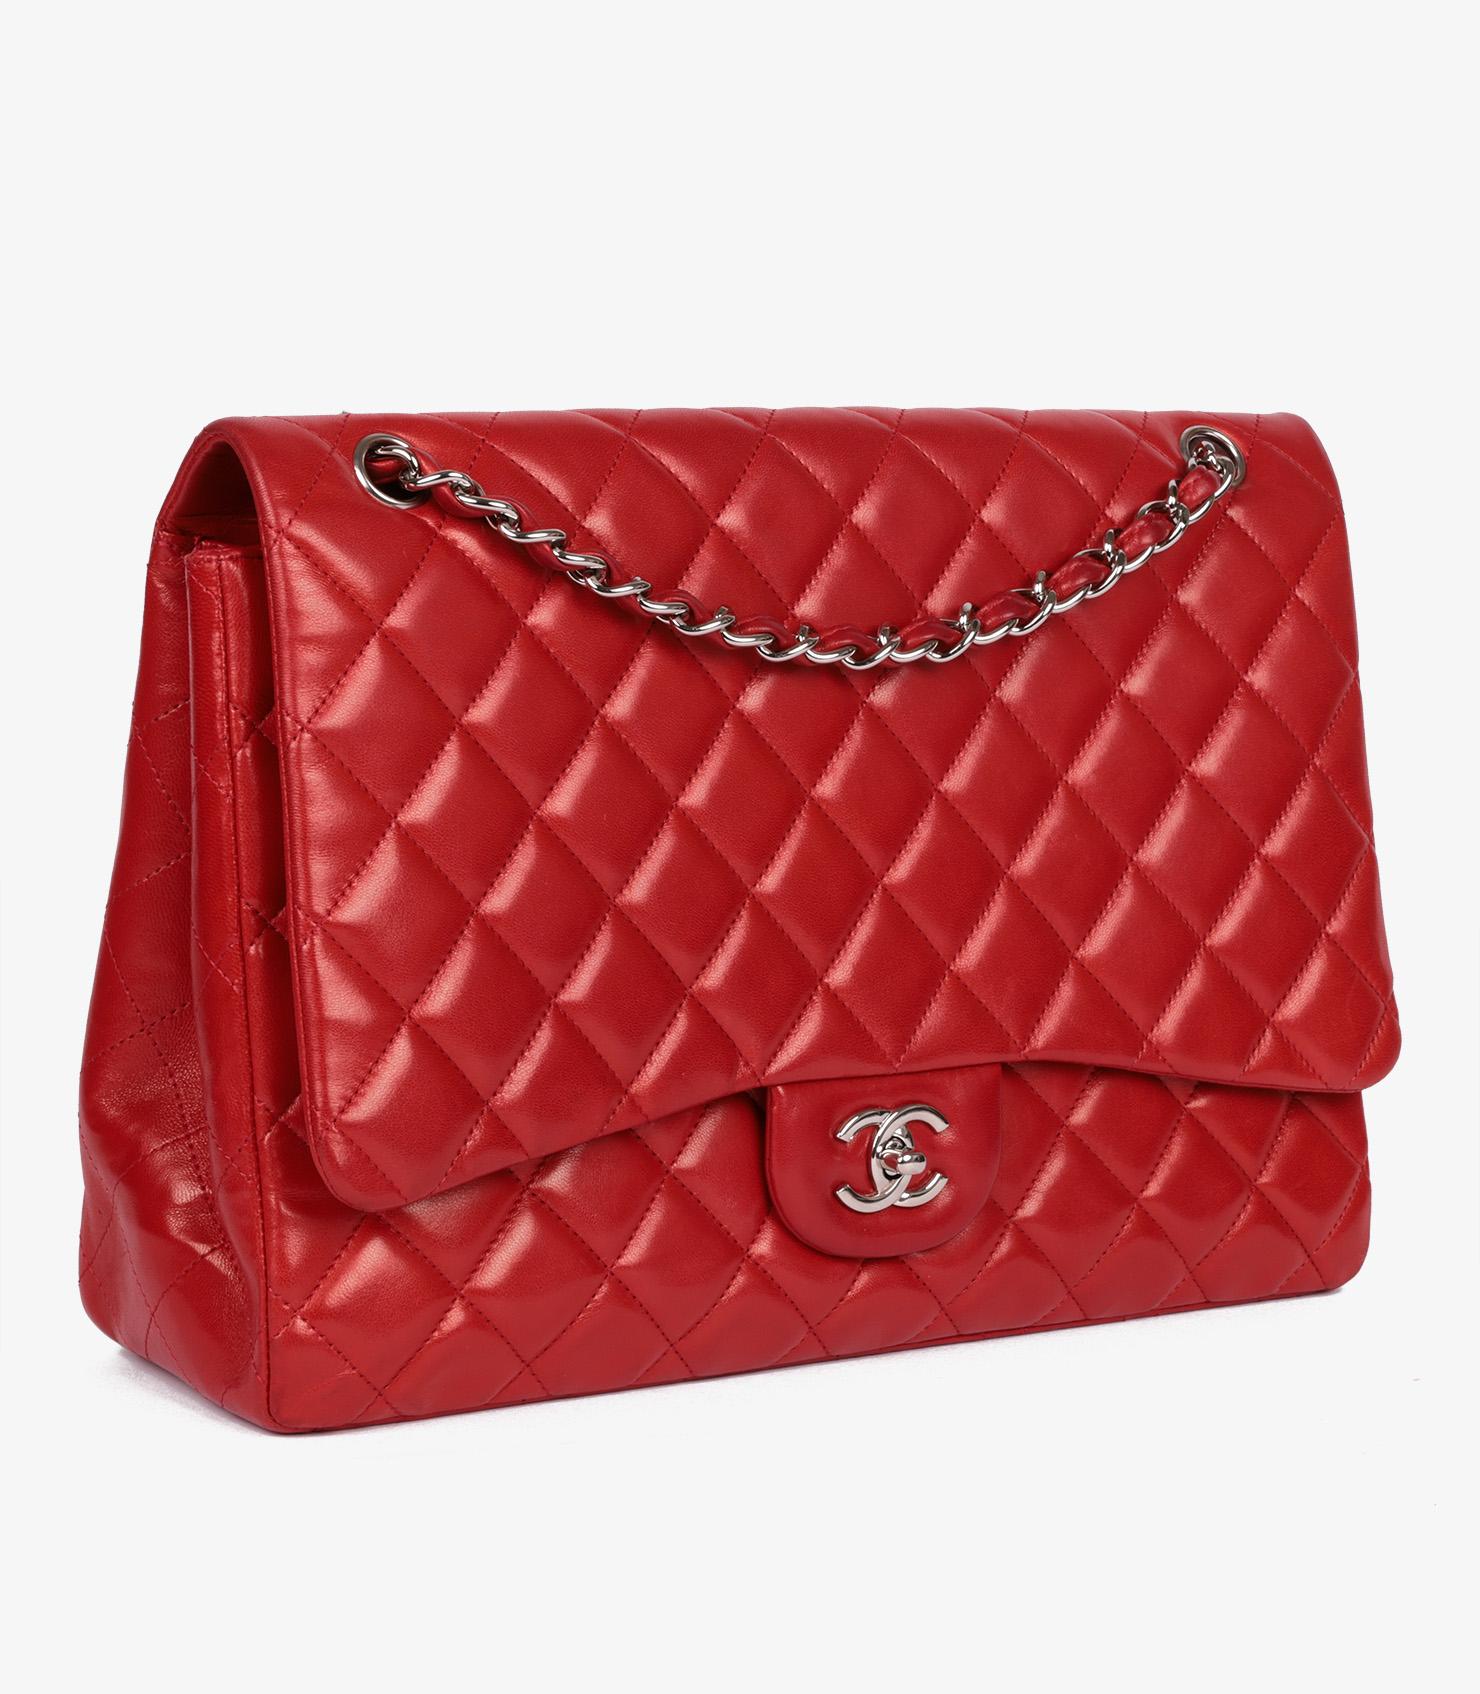 Chanel Red Quilted Lambskin Maxi Classic Single Flap Bag

Model- Maxi Classic Single Flap Bag
Product Type- Crossbody, Shoulder
Serial Number- 13******
Age- Circa 2009
Accompanied By- Chanel Dust Bag, Box, Authenticity Card, Care Booklet,